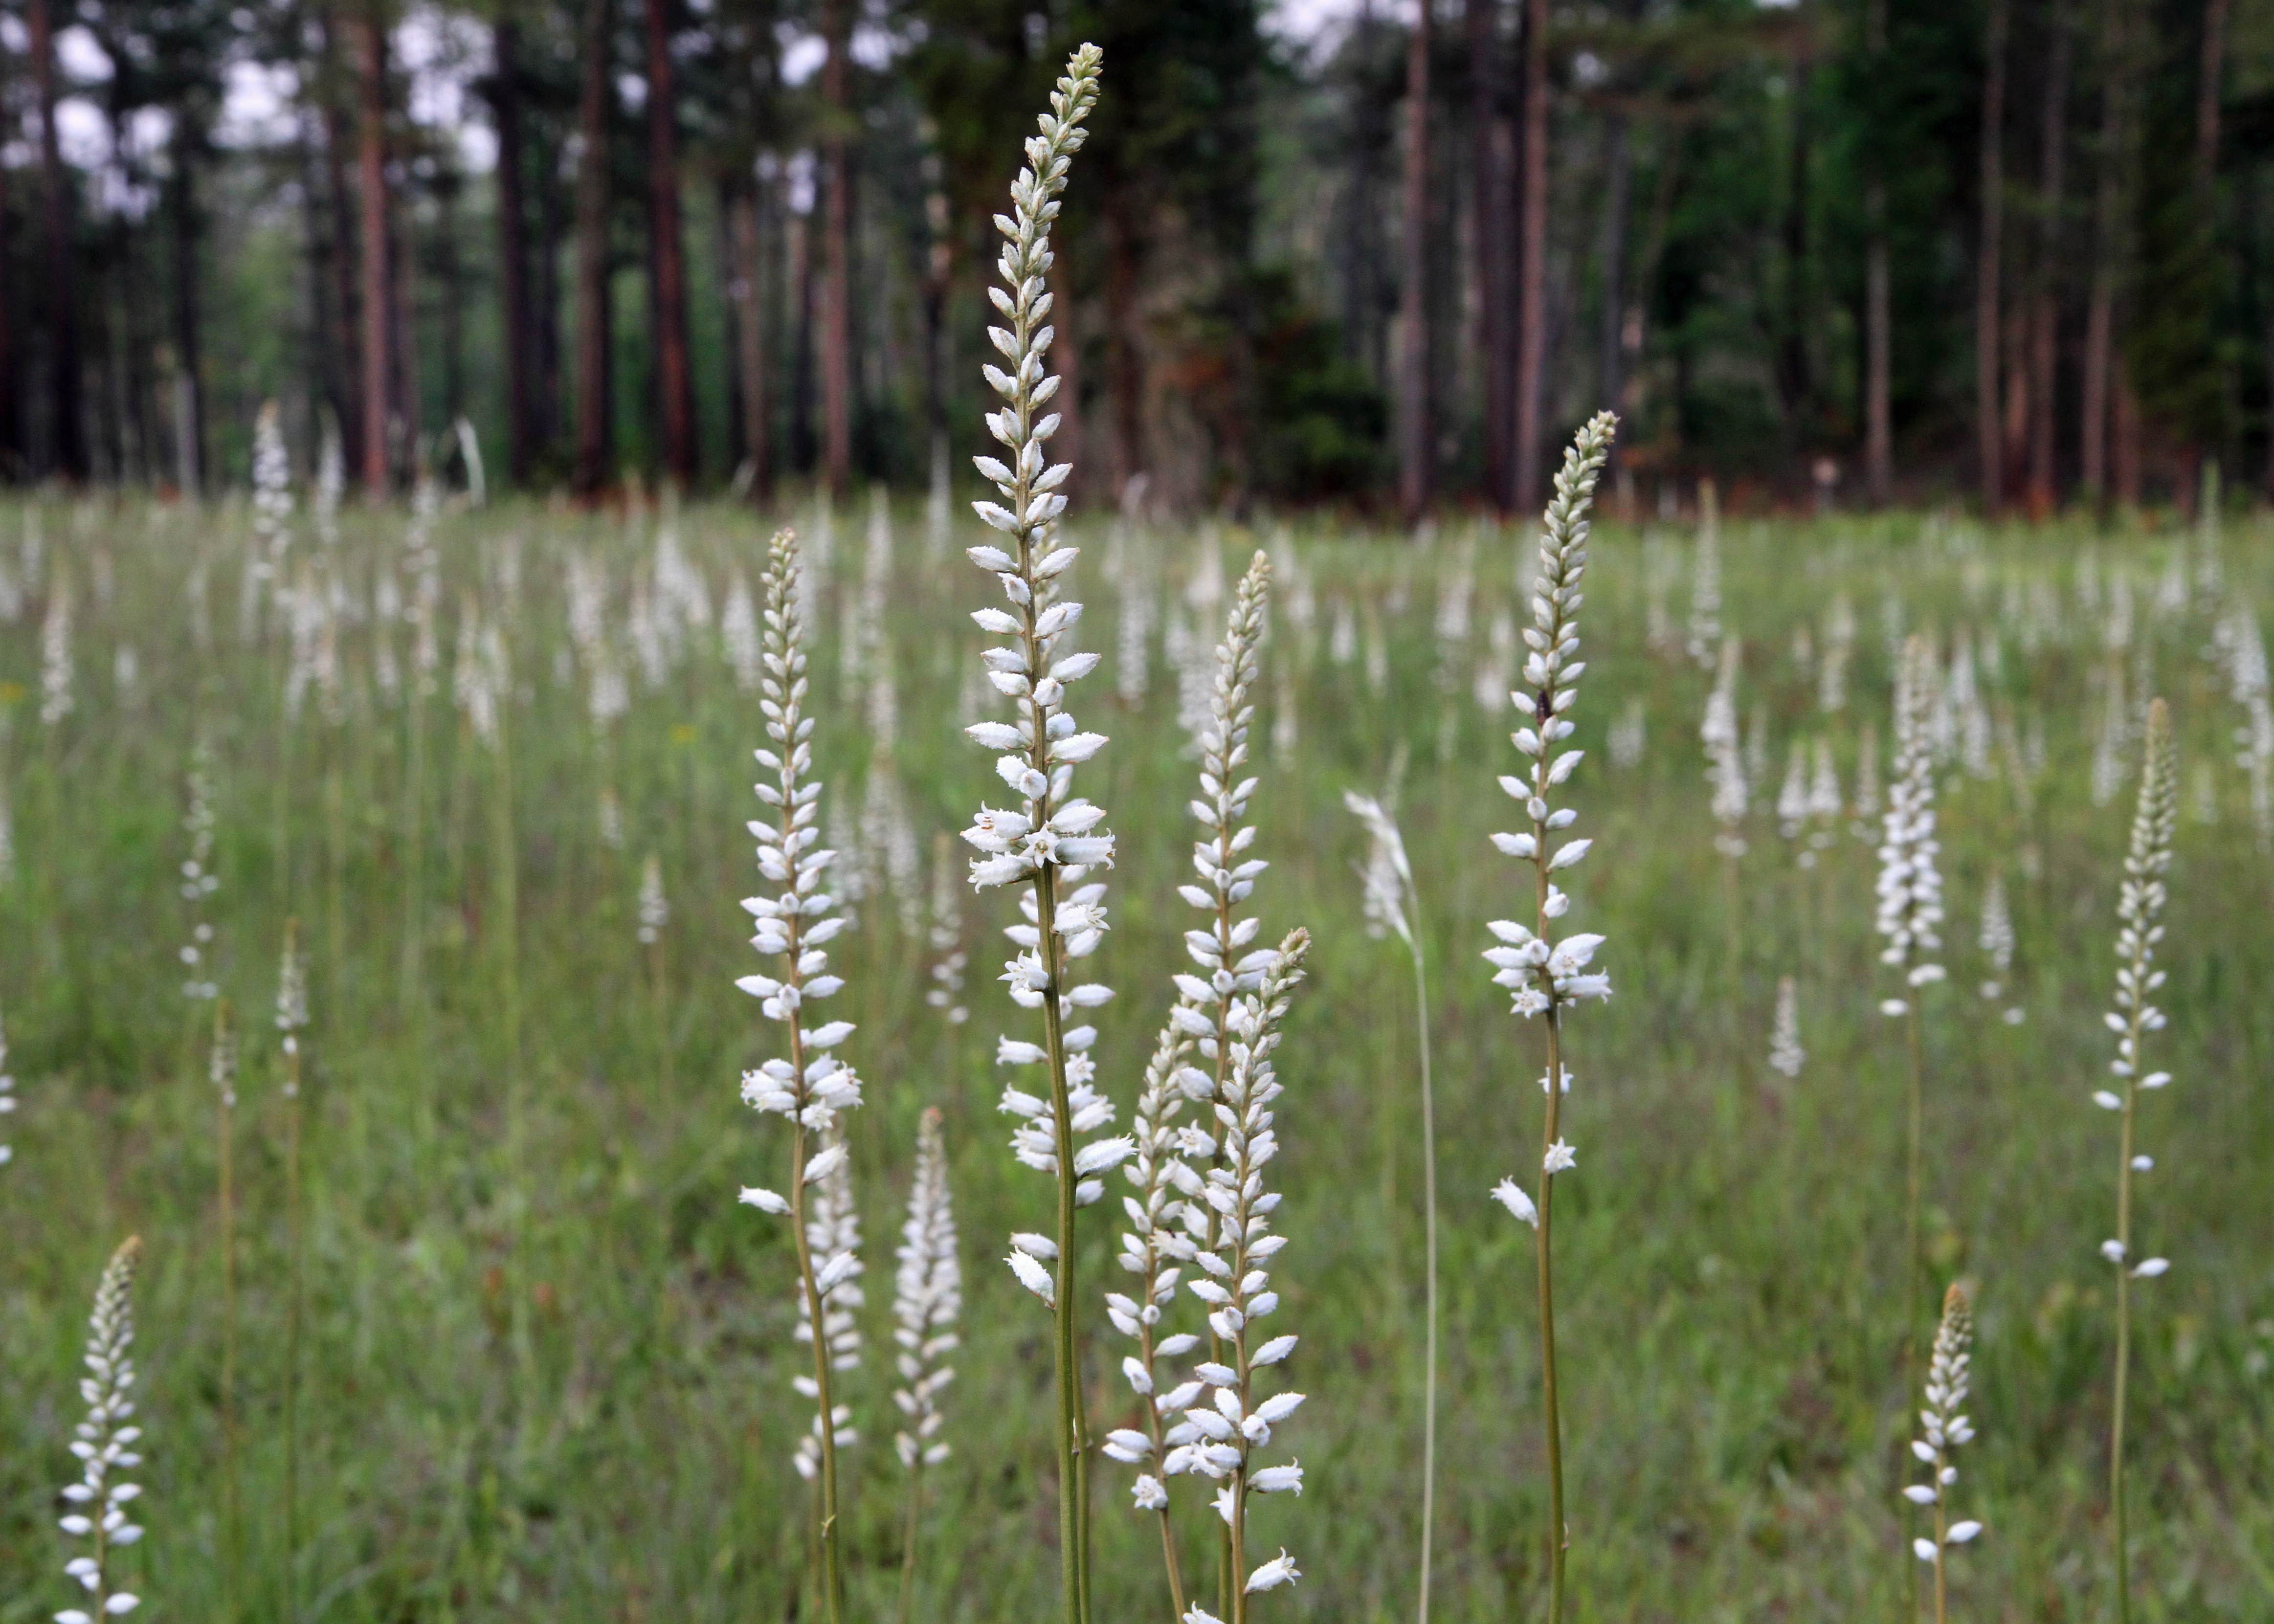 The Scientific Name is Aletris farinosa. You will likely hear them called Northern White Colic-root, Mealy Colic-root, Stargrass. This picture shows the Several hundred Aletris farinosa decorate this wet meadow in the Carolina Sandhills NWR in early May. of Aletris farinosa